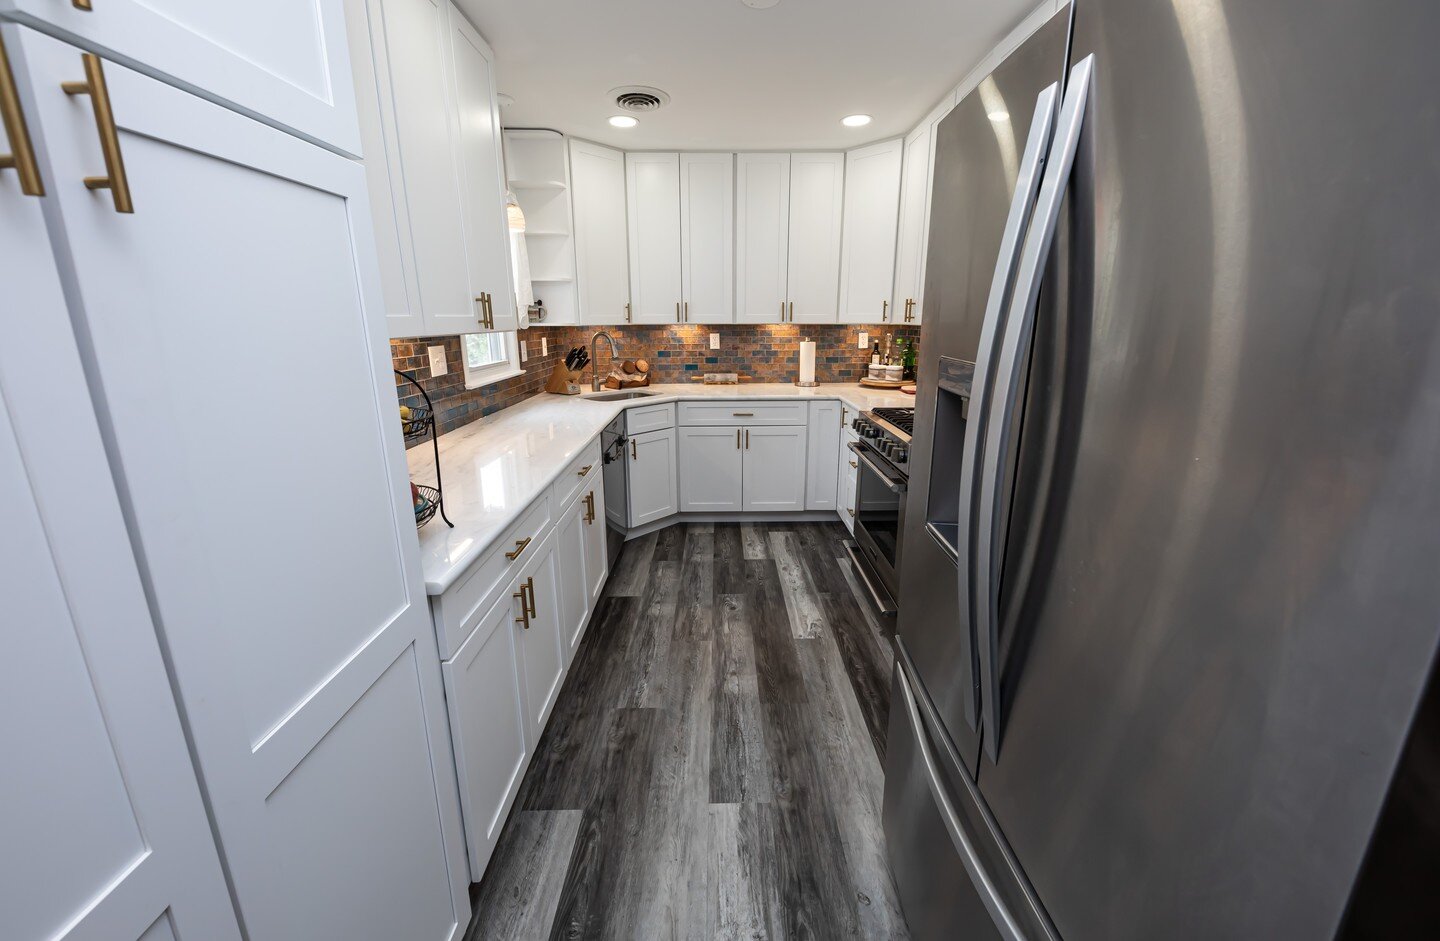 Working with special space requirements? We can help with that. J &amp; M has an expert design team ready and able to work with everything you've got, including home additions and expansion! Reach out to us at jmtilellc.com today for more info. Here'